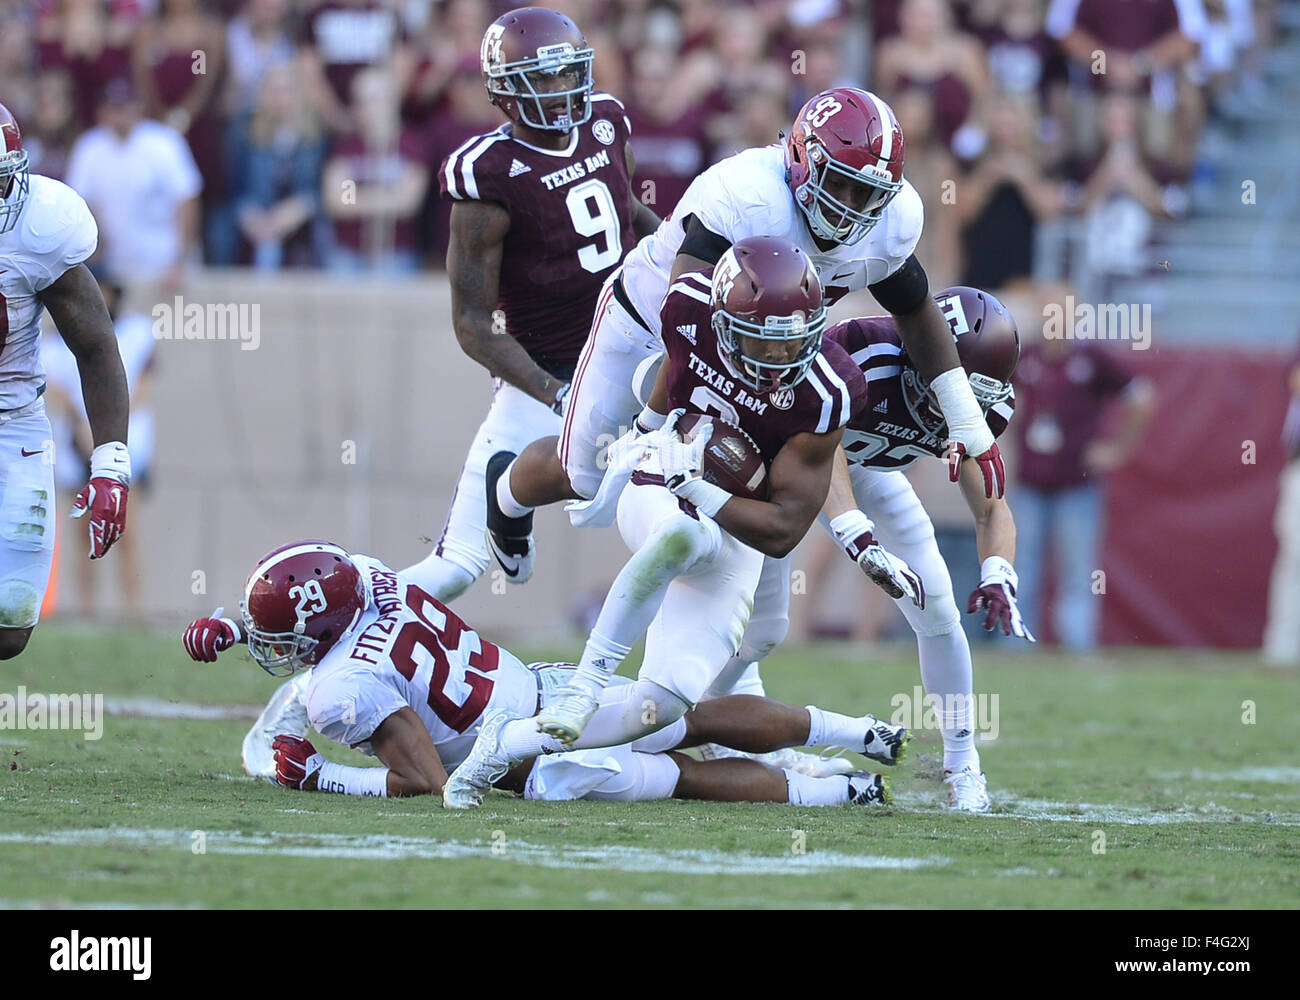 College Station, Texas, USA. 17th Oct, 2015. Texas A&M Aggies wide receiver Christian Kirk (3) gets some positive yardage and gets tackled by Alabama Crimson Tide defensive lineman Jonathan Allen (93) during the game between the Texas A&M Aggies and the Alabama Crimson Tide at Kyle Field in College Station, Texas. Alabama leads the first half against the Texas A&M, 28-13. Patrick Green/CSM/Alamy Live News Stock Photo